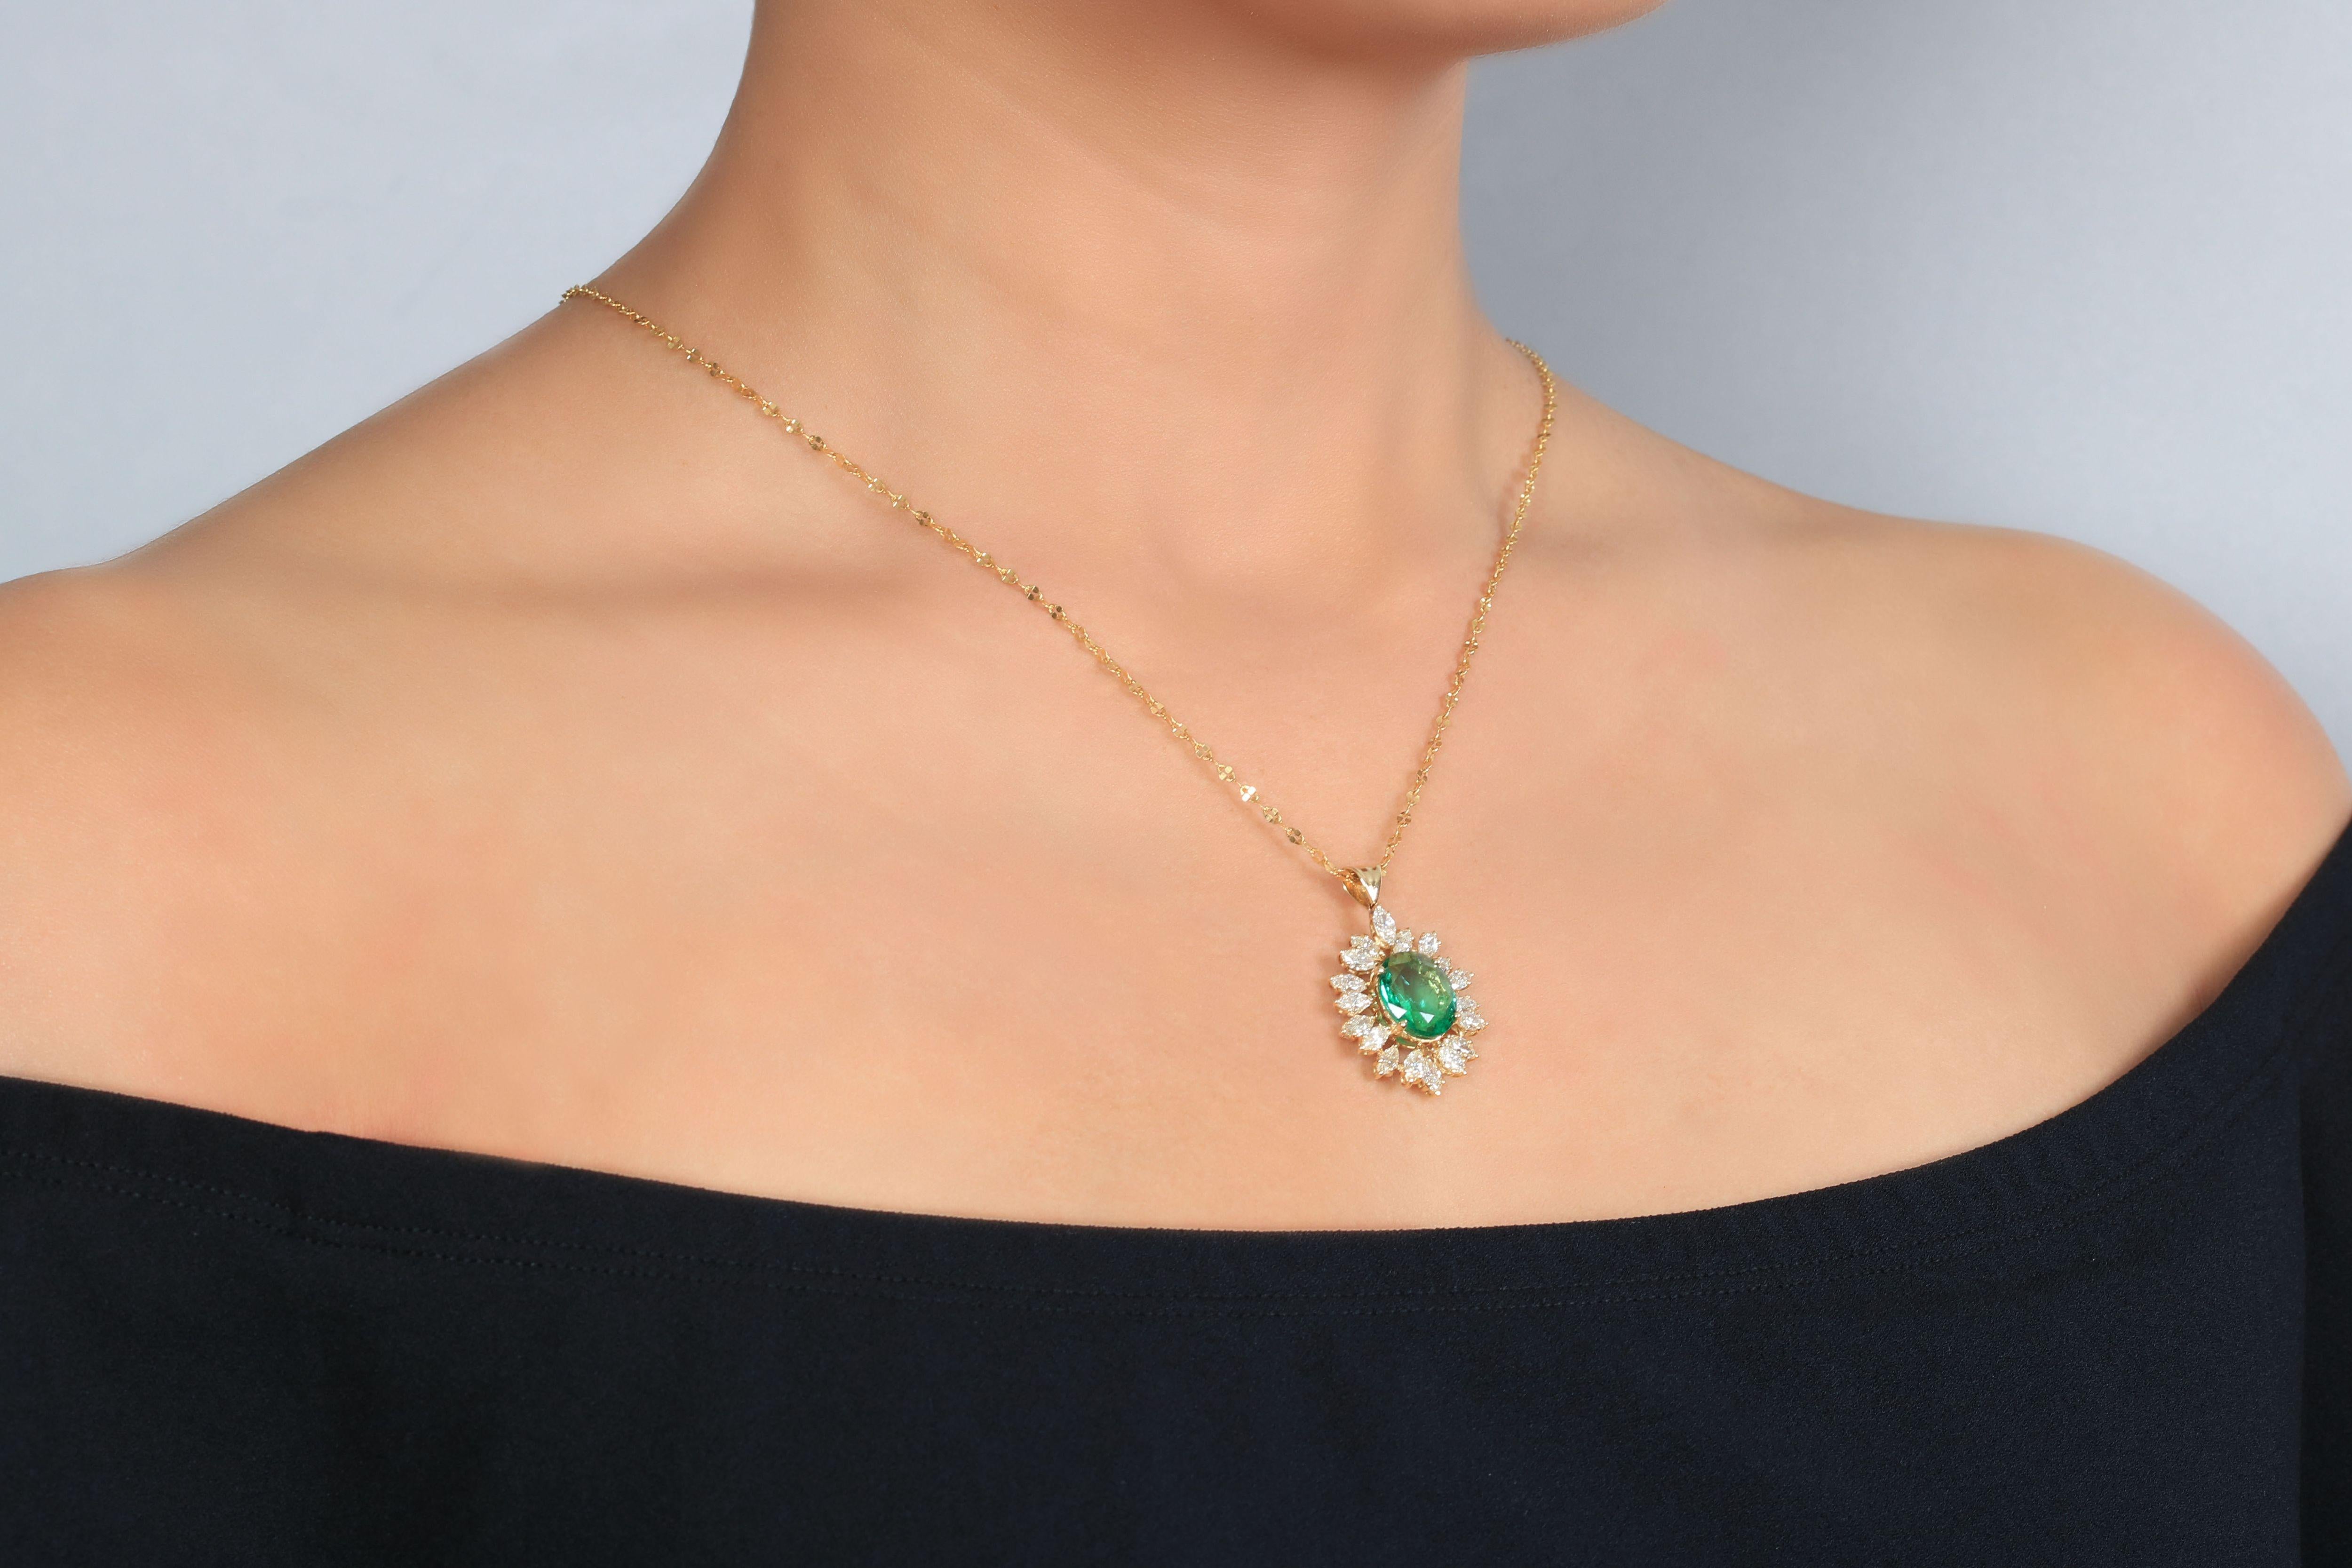 A Golden Glow, this oval cut Zambian emerald with marquise cut diamonds necklace creates a sense of delight mixed with this artistic combination of precious stones. Although it's a classic emerald jewelry, it holds the appeal of a modern